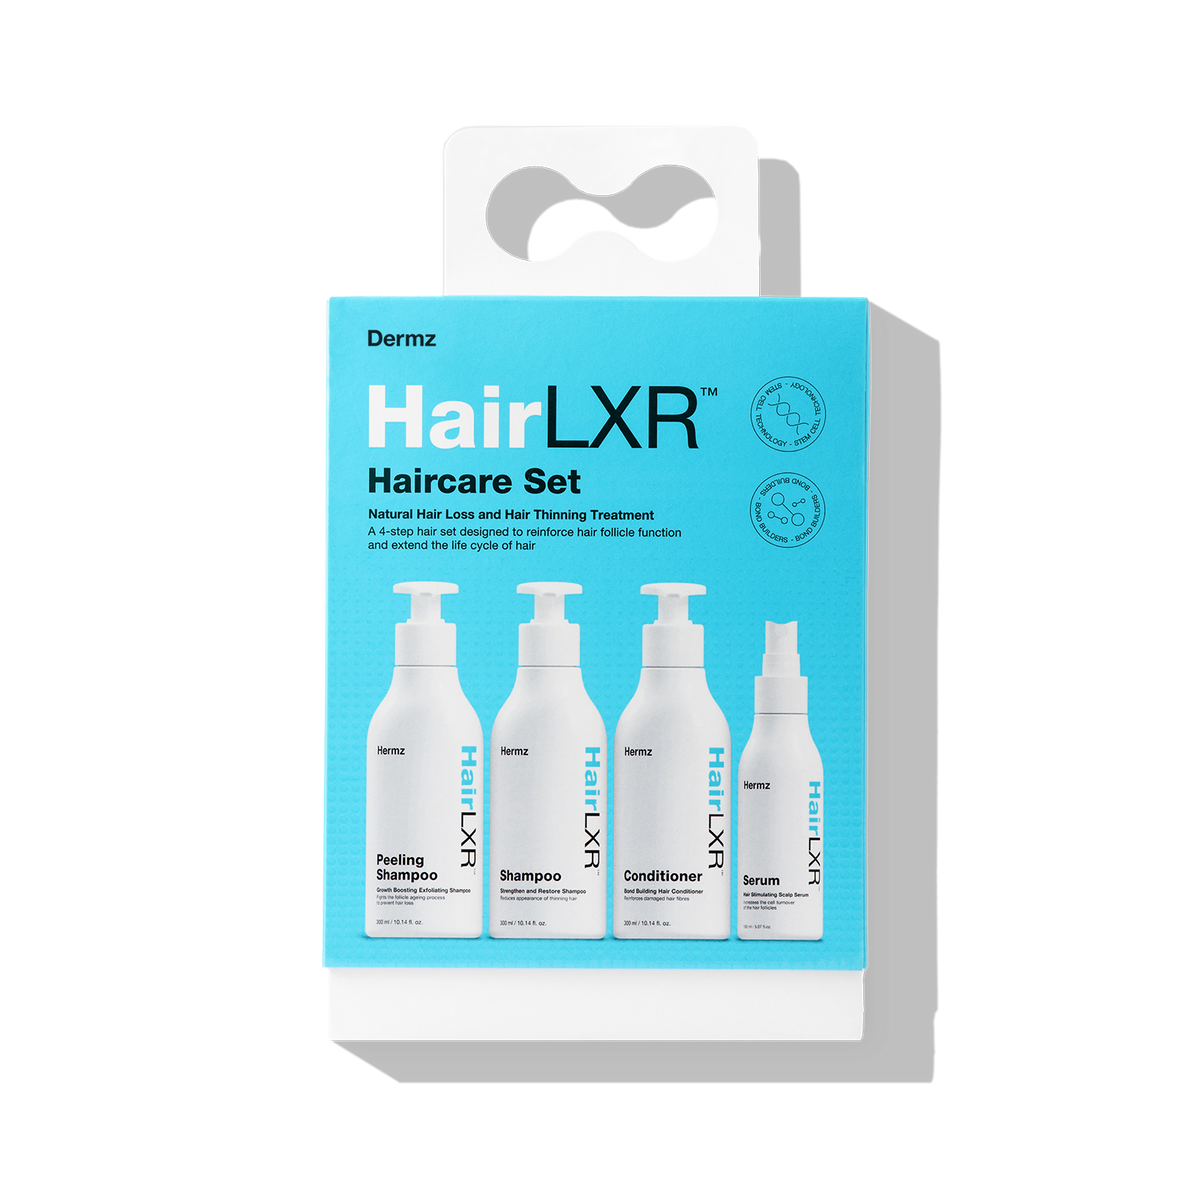 4-Step HairLXR Set For Hair Loss, Thinning And Oily Hair